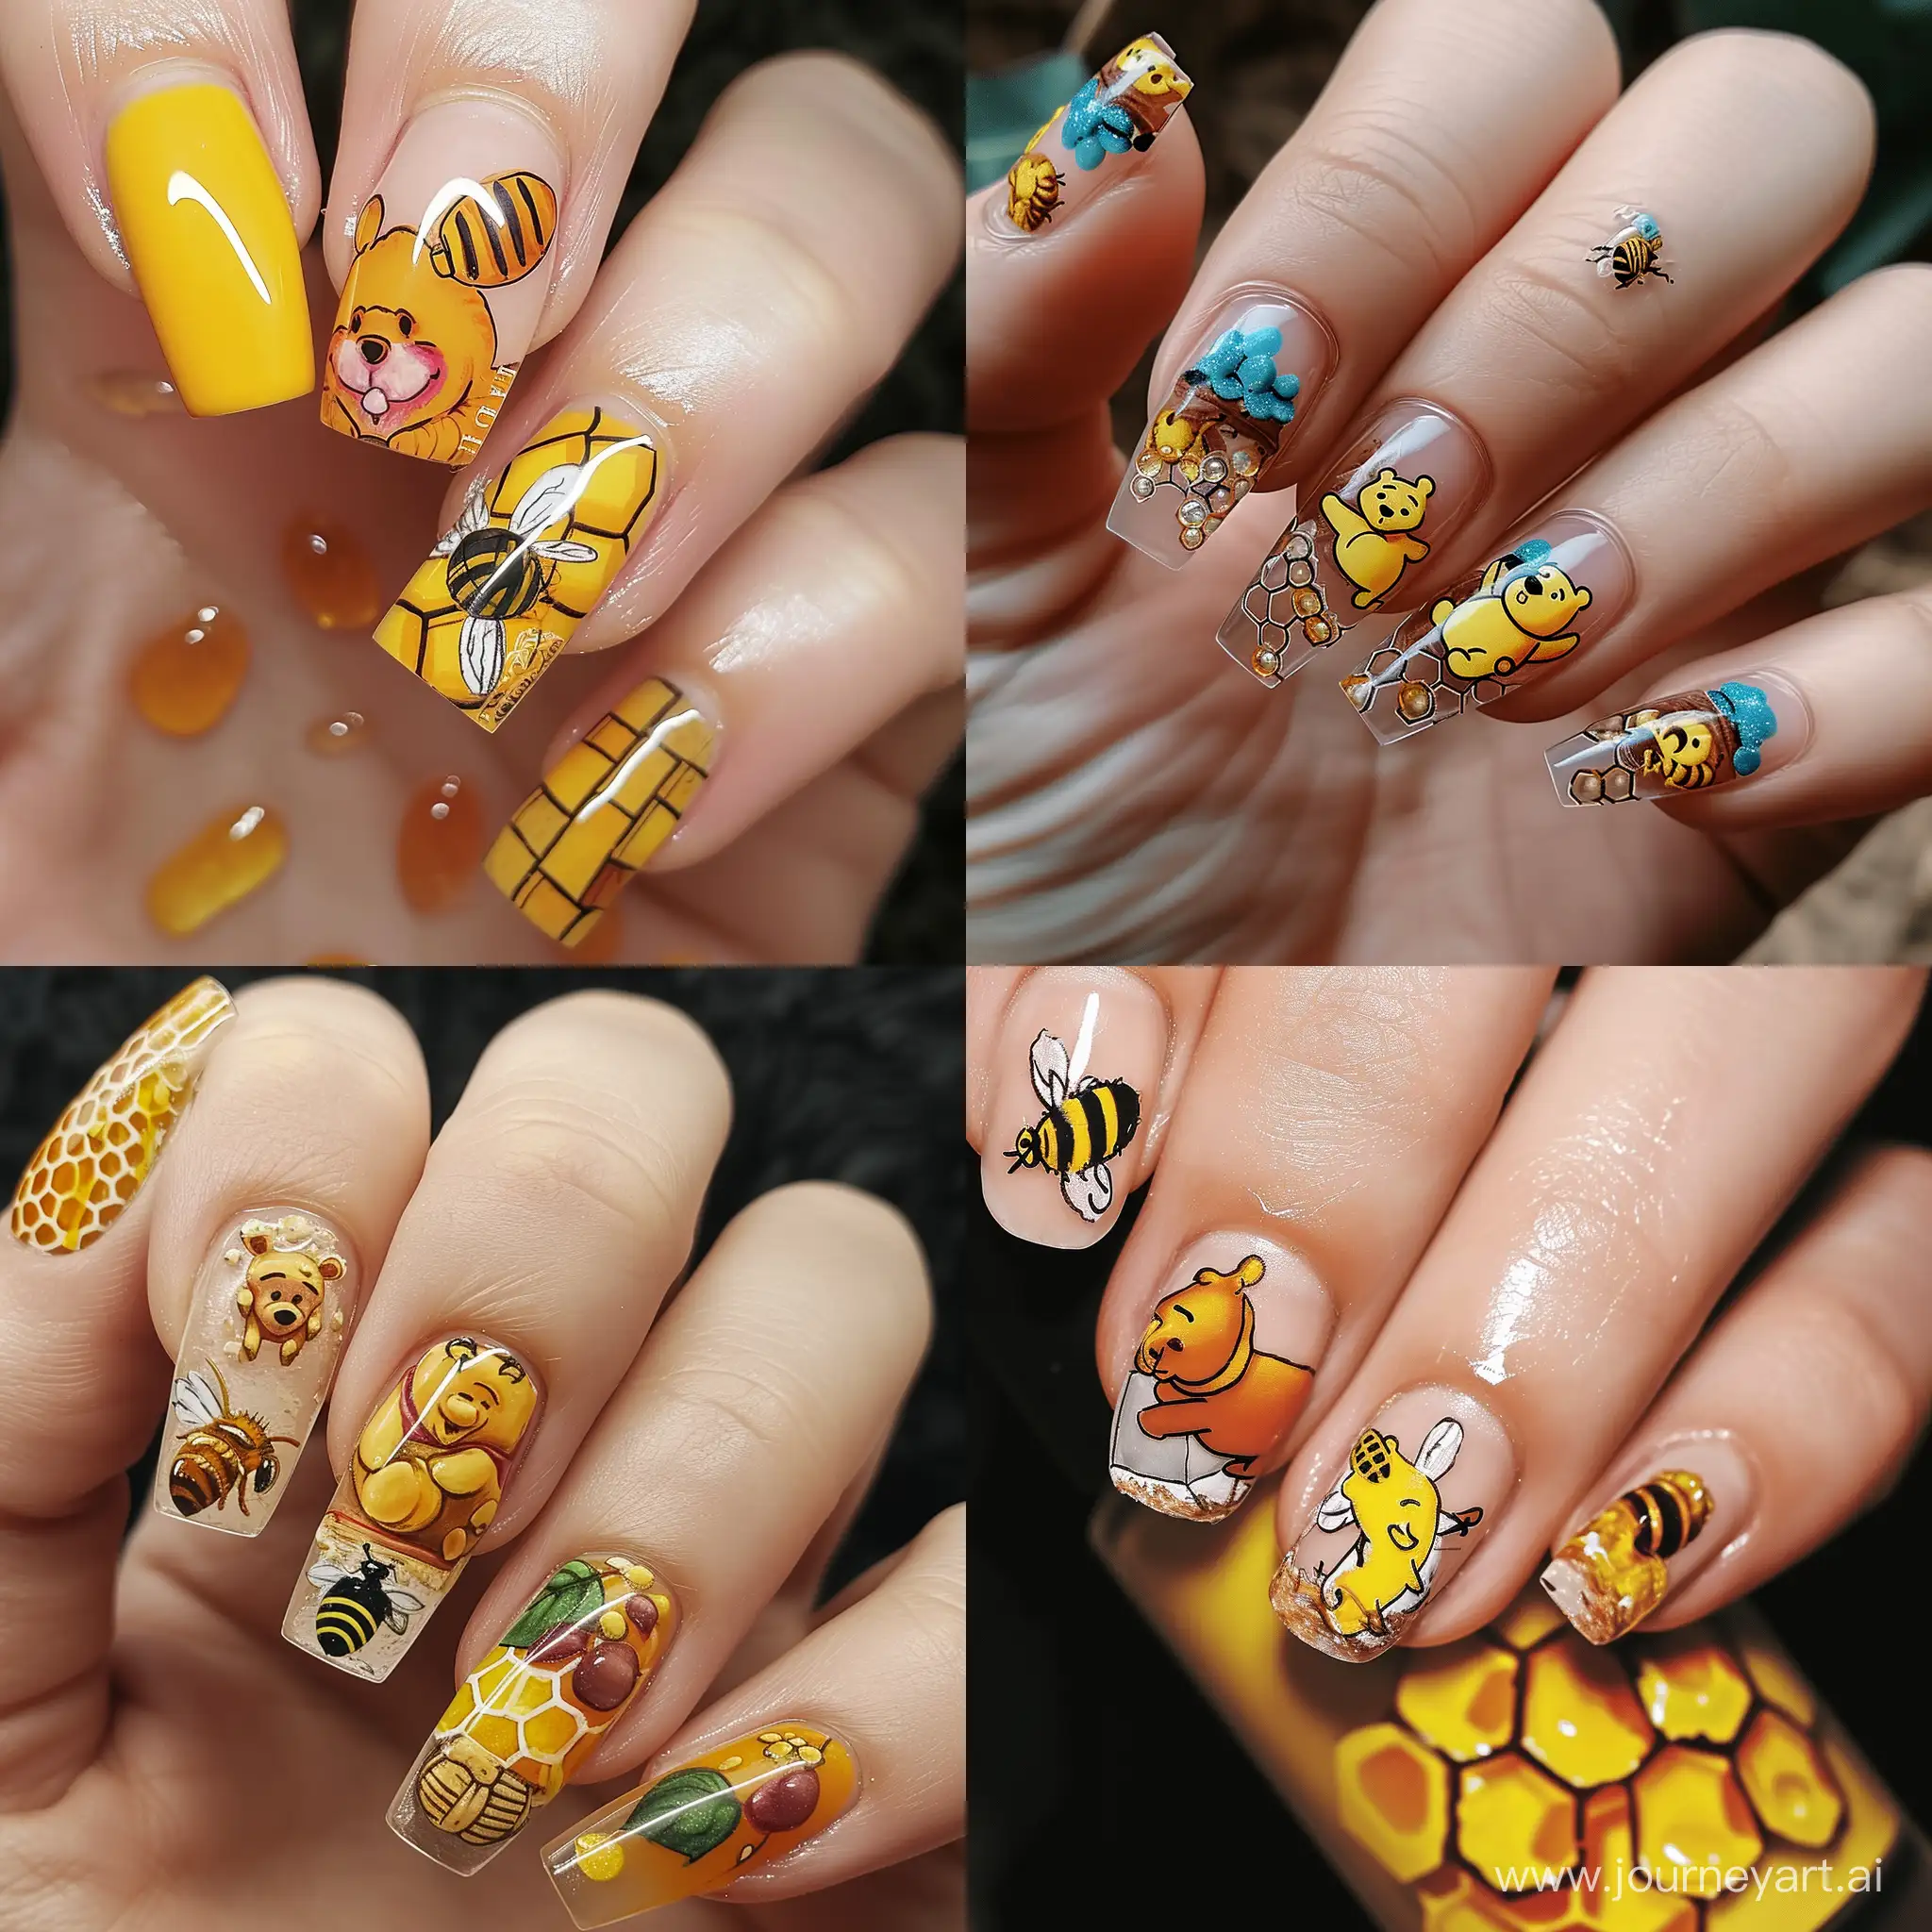 Whimsical-Winnie-the-Pooh-Nail-Art-with-Beehive-and-Honey-Accents